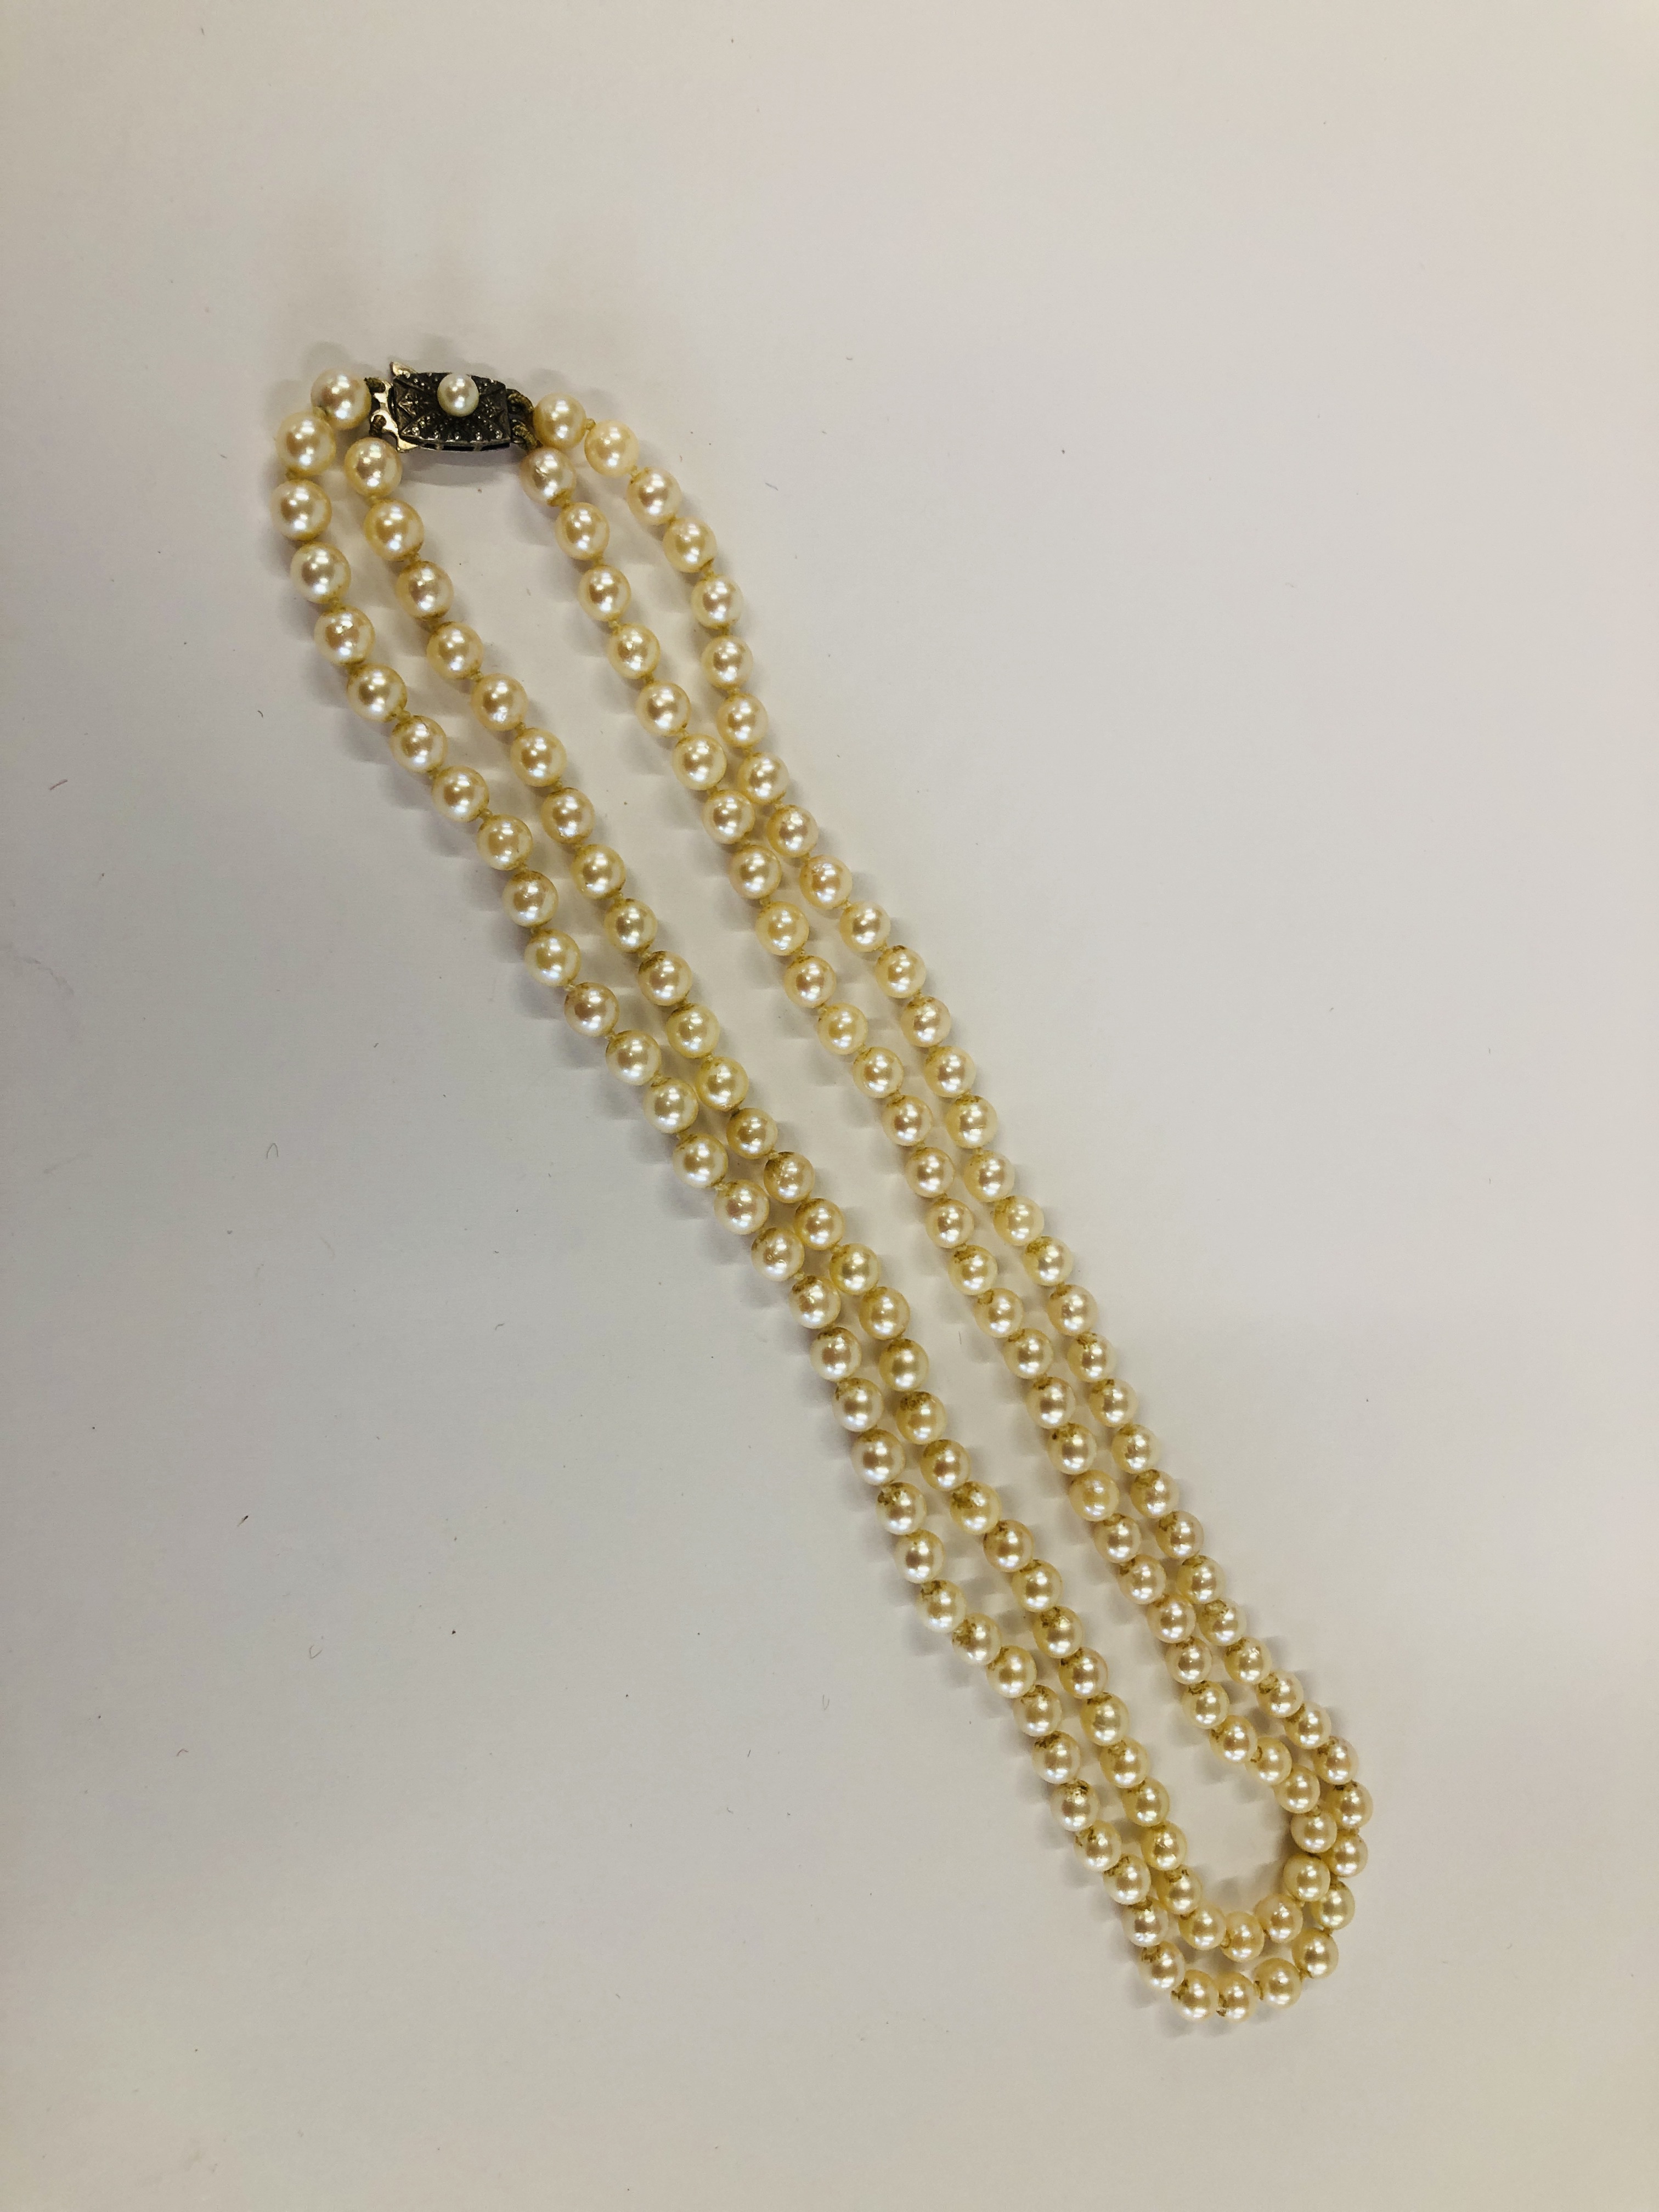 A VINTAGE DOUBLE ROW PEARL NECKLACE BY "MIKIMOTO" ALONG WITH AN ORIGINAL VINTAGE MIKIMOTO SILK - Image 2 of 10